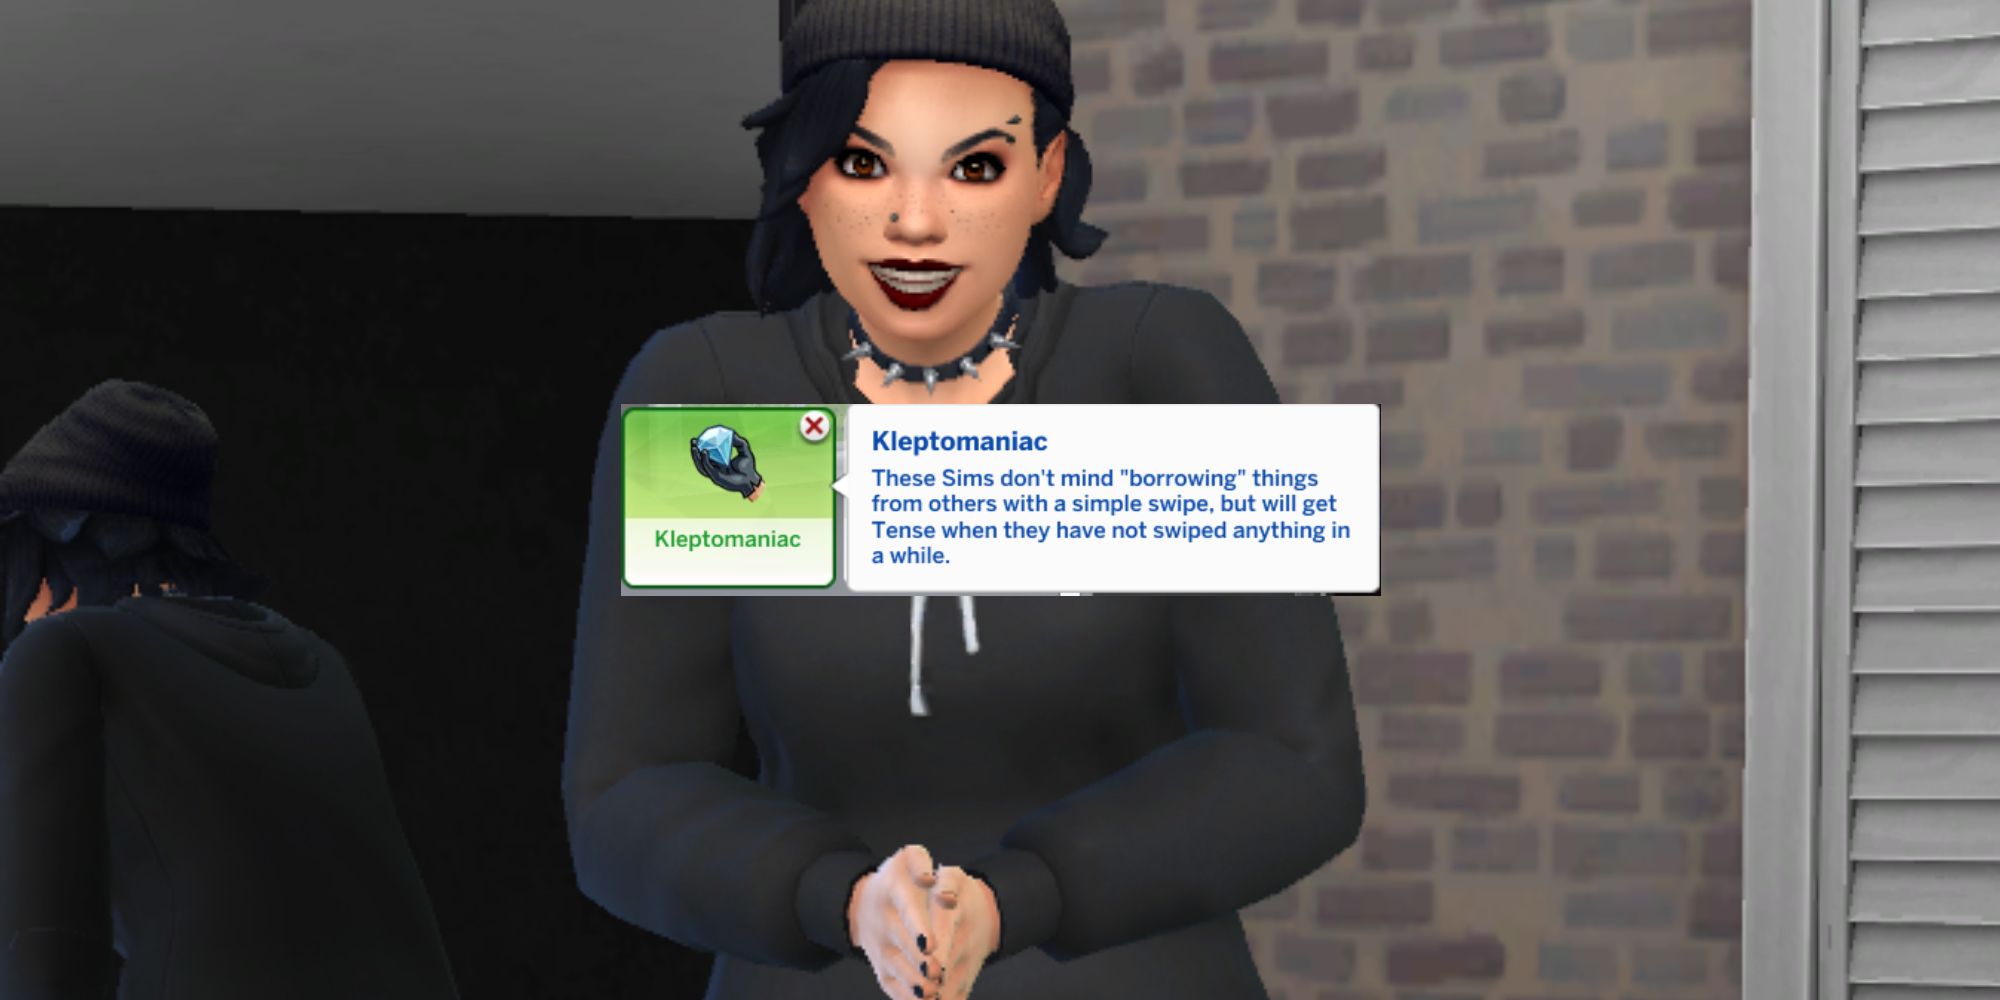 An evil Sim has the kleptomaniac trait and can steal things from other households